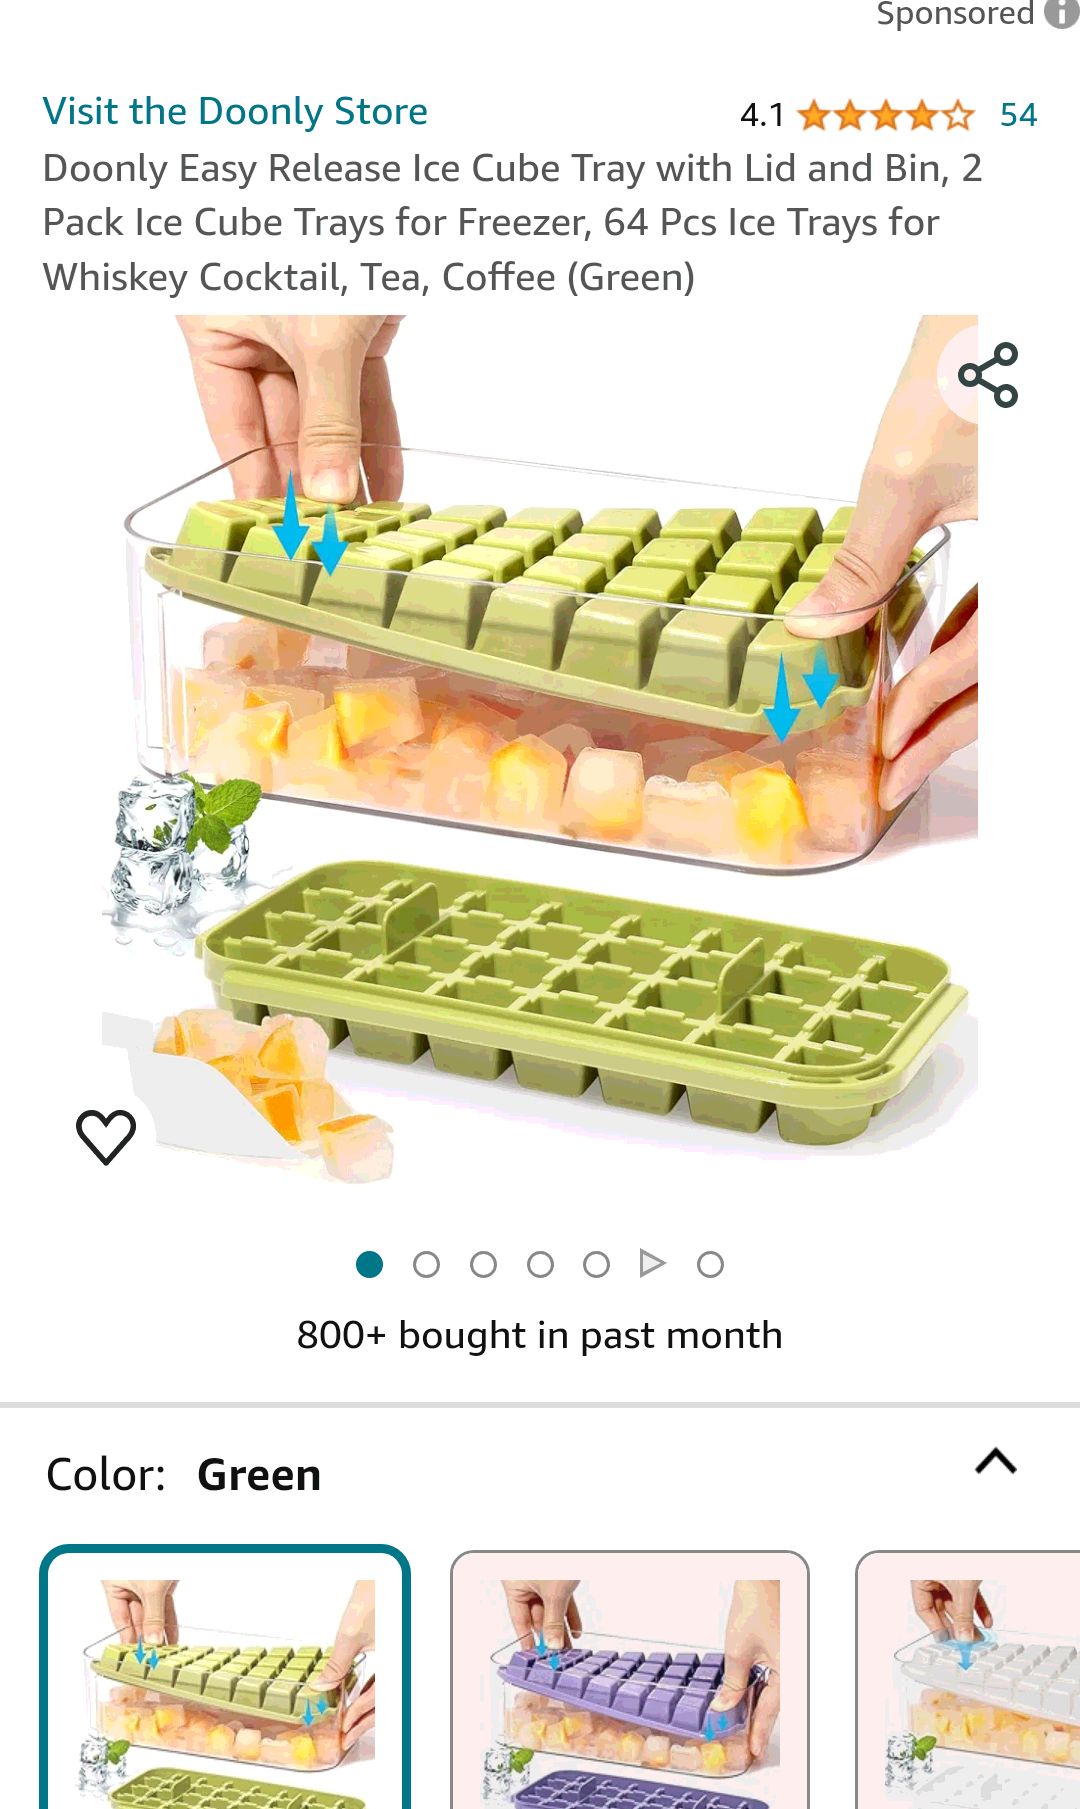 Doonly Easy Release Ice Cube Tray with Lid and Bin, 2 Pack Ice Cube Trays for Freezer, 64 Pcs Ice Trays for Whiskey Cocktail, Tea, Coffee (Green): Home & Kitchen